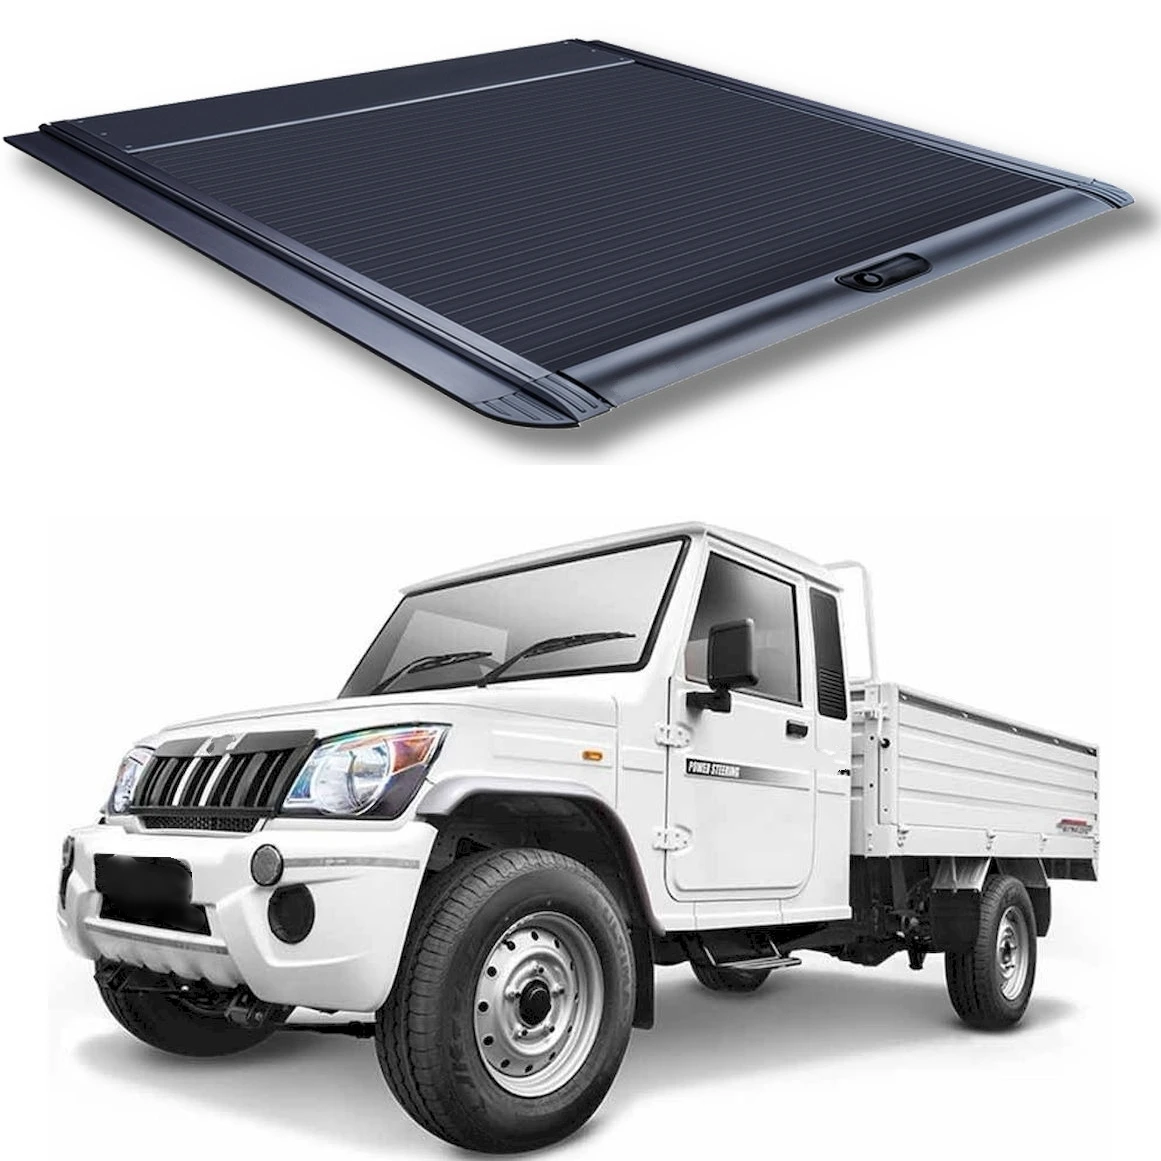 

Aluminum Retractable Roller Lid Pickup Bed Cover for MAHINDRA PIK UP